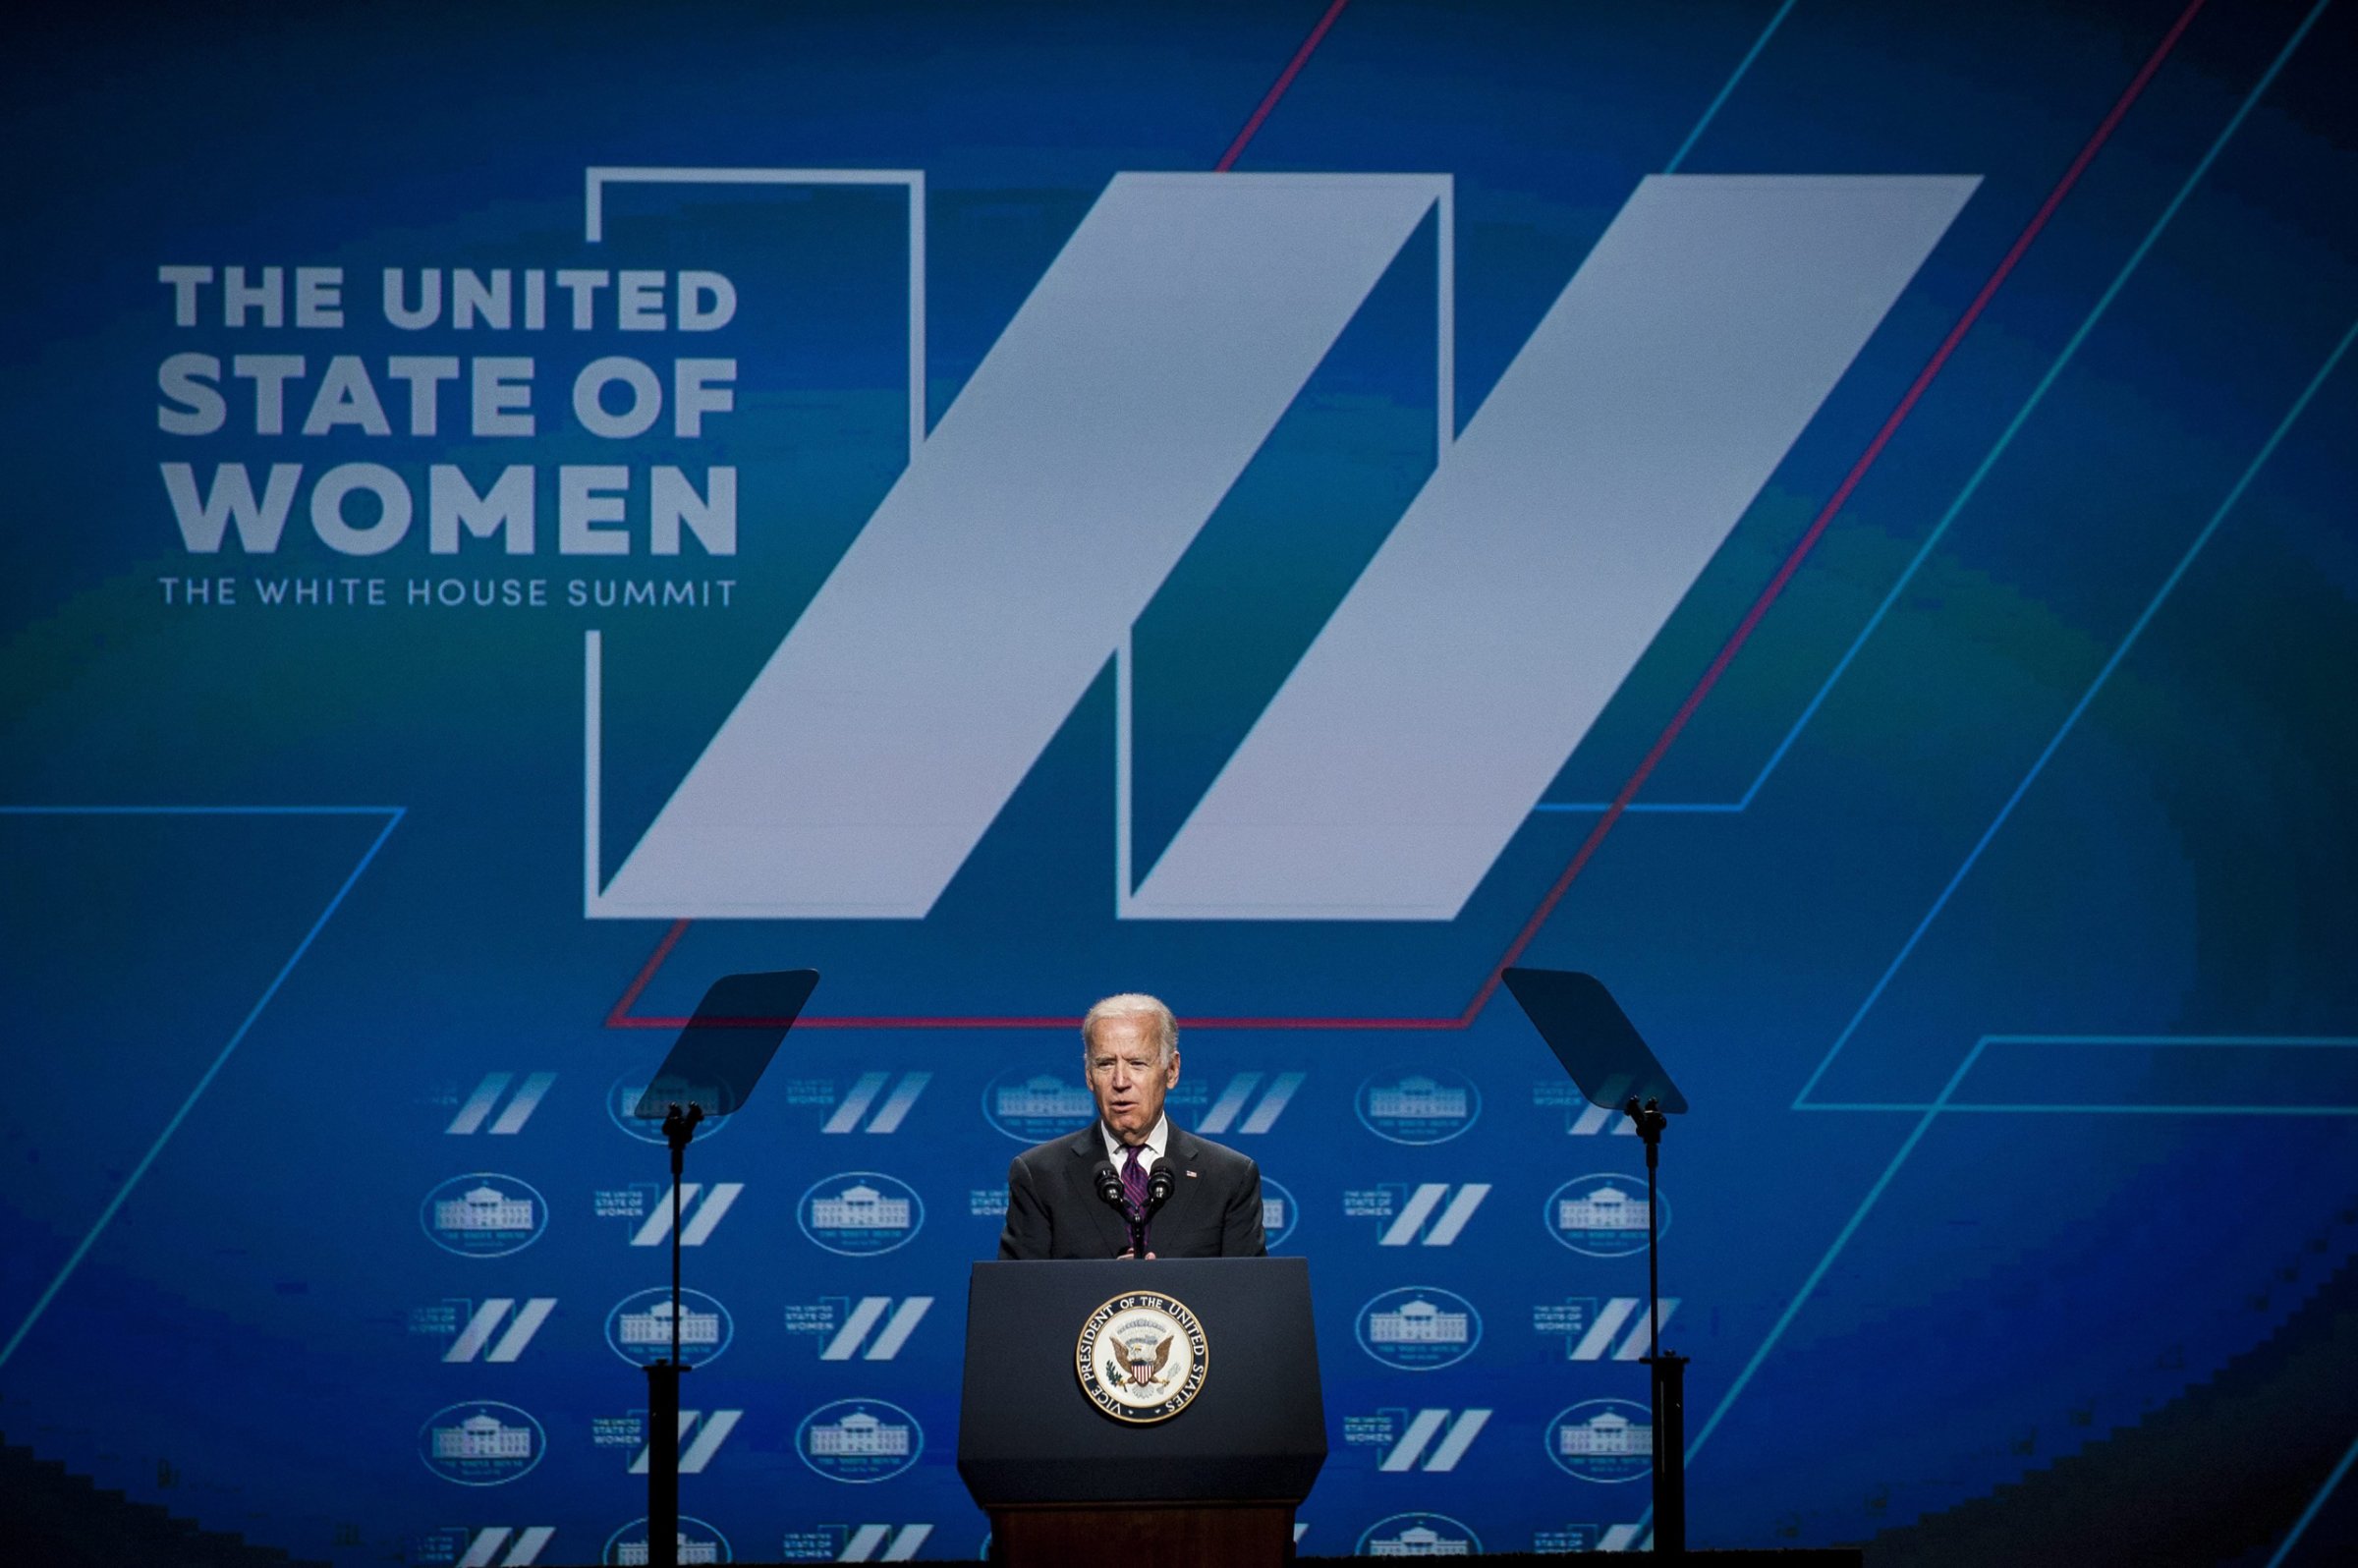 Vice President Joe Biden delivers remarks at the inaugural 'White House United State of Women Summit' at the Walter E. Washington Convention Center in Washington, D.C. on June 14, 2016.